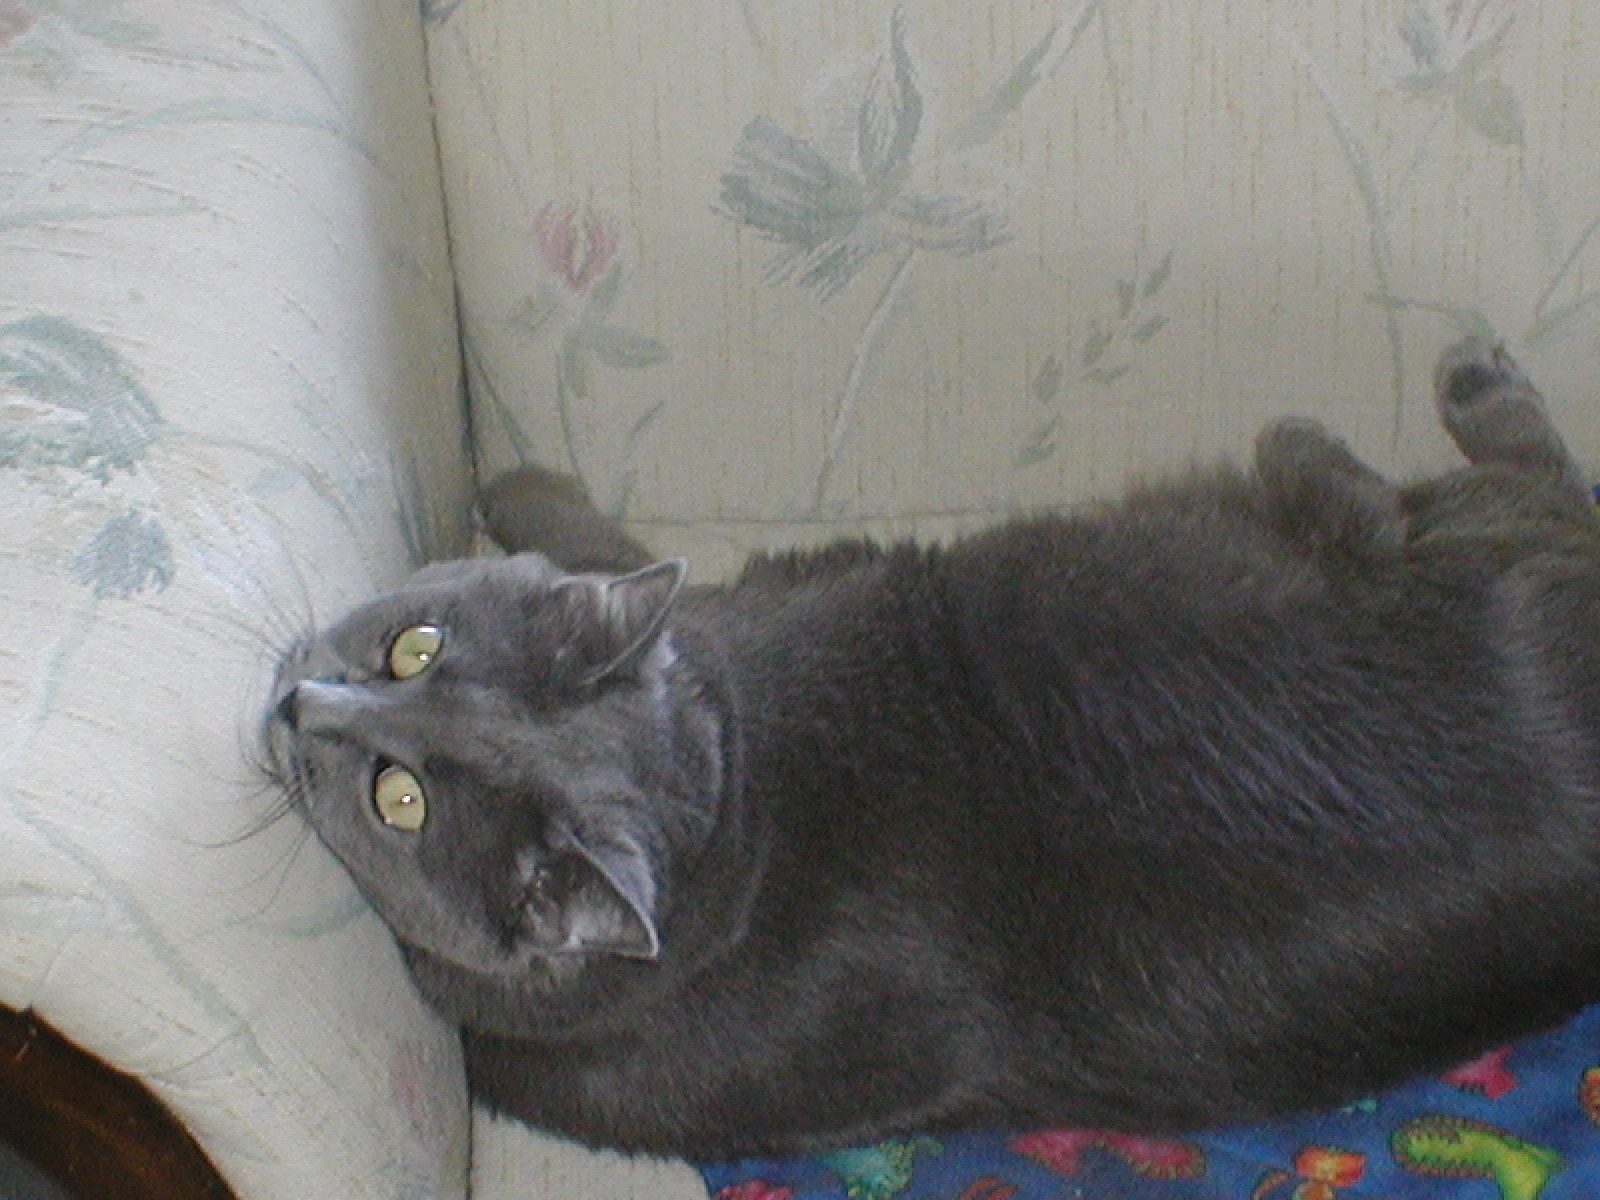 Mouse again, this time on the love seat.